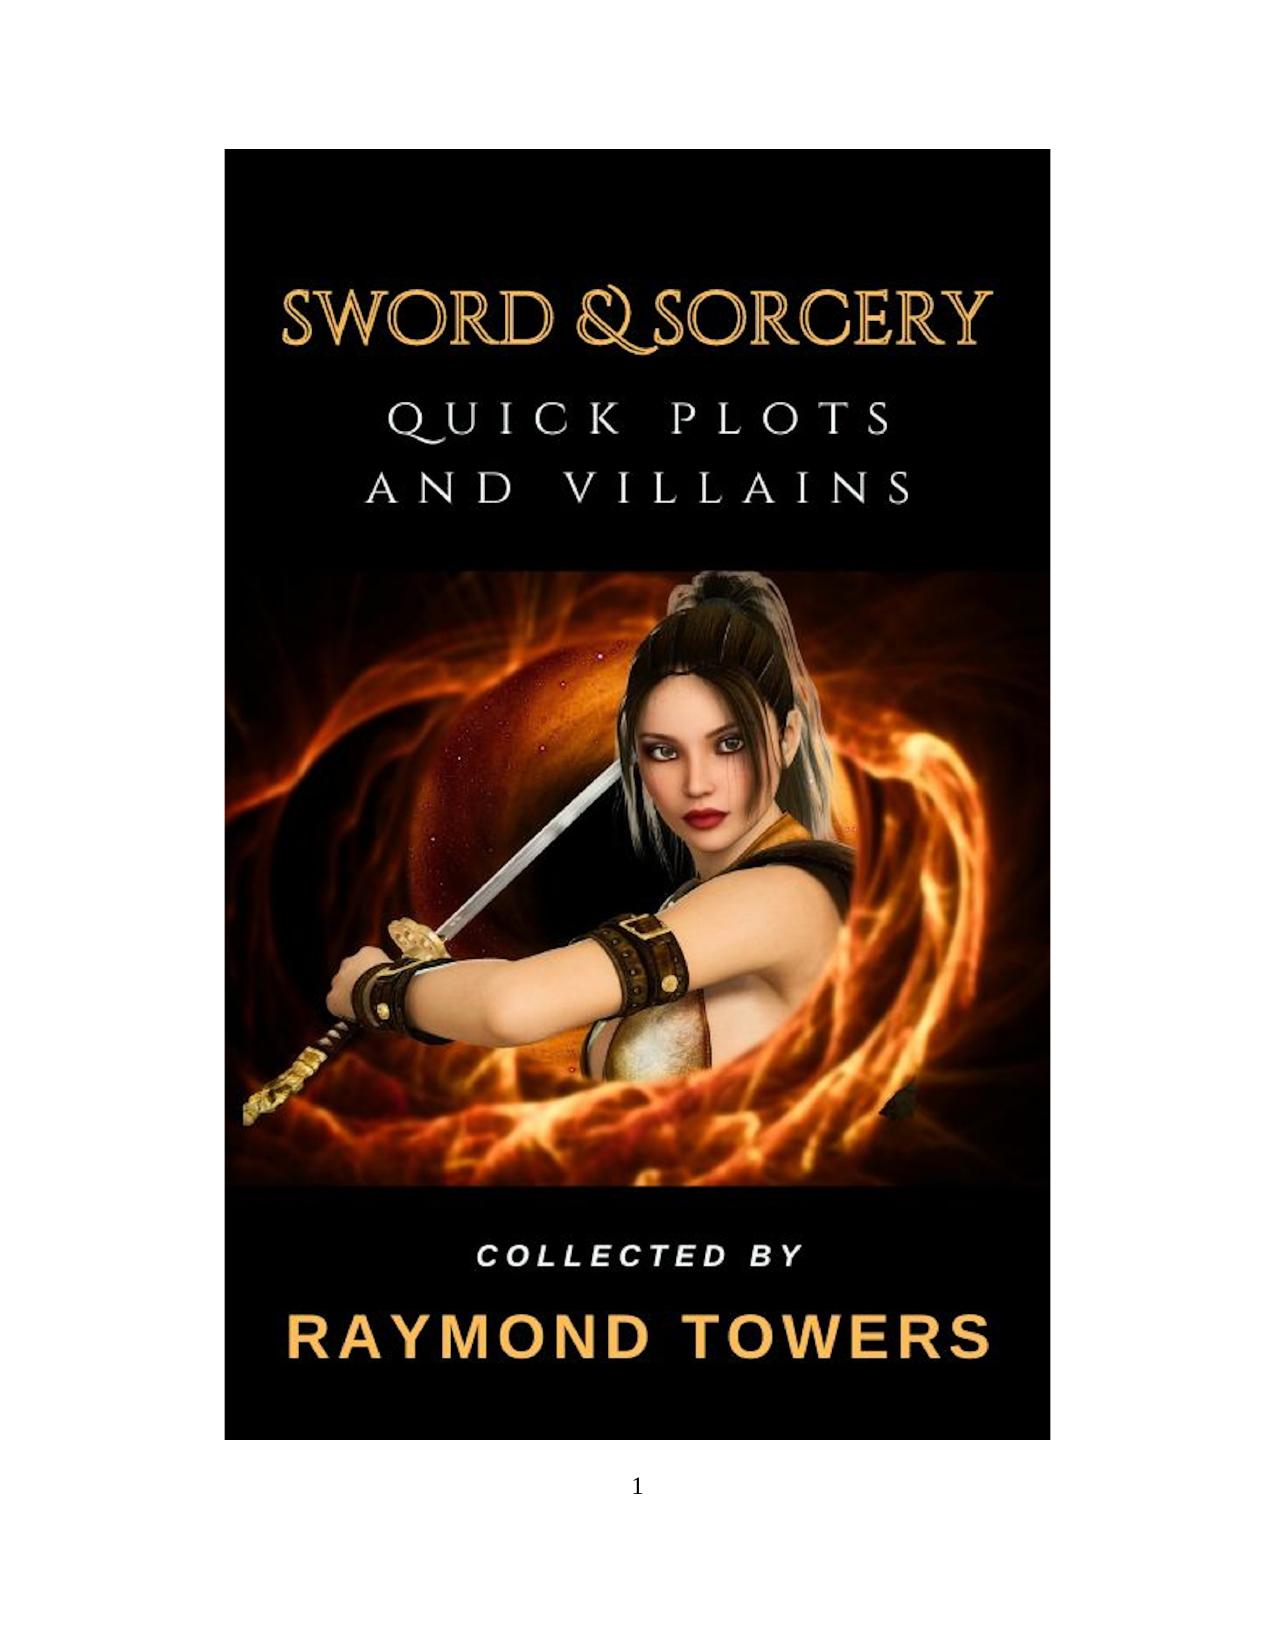 Sword and Sorcery Quick Plots And Villains [9]